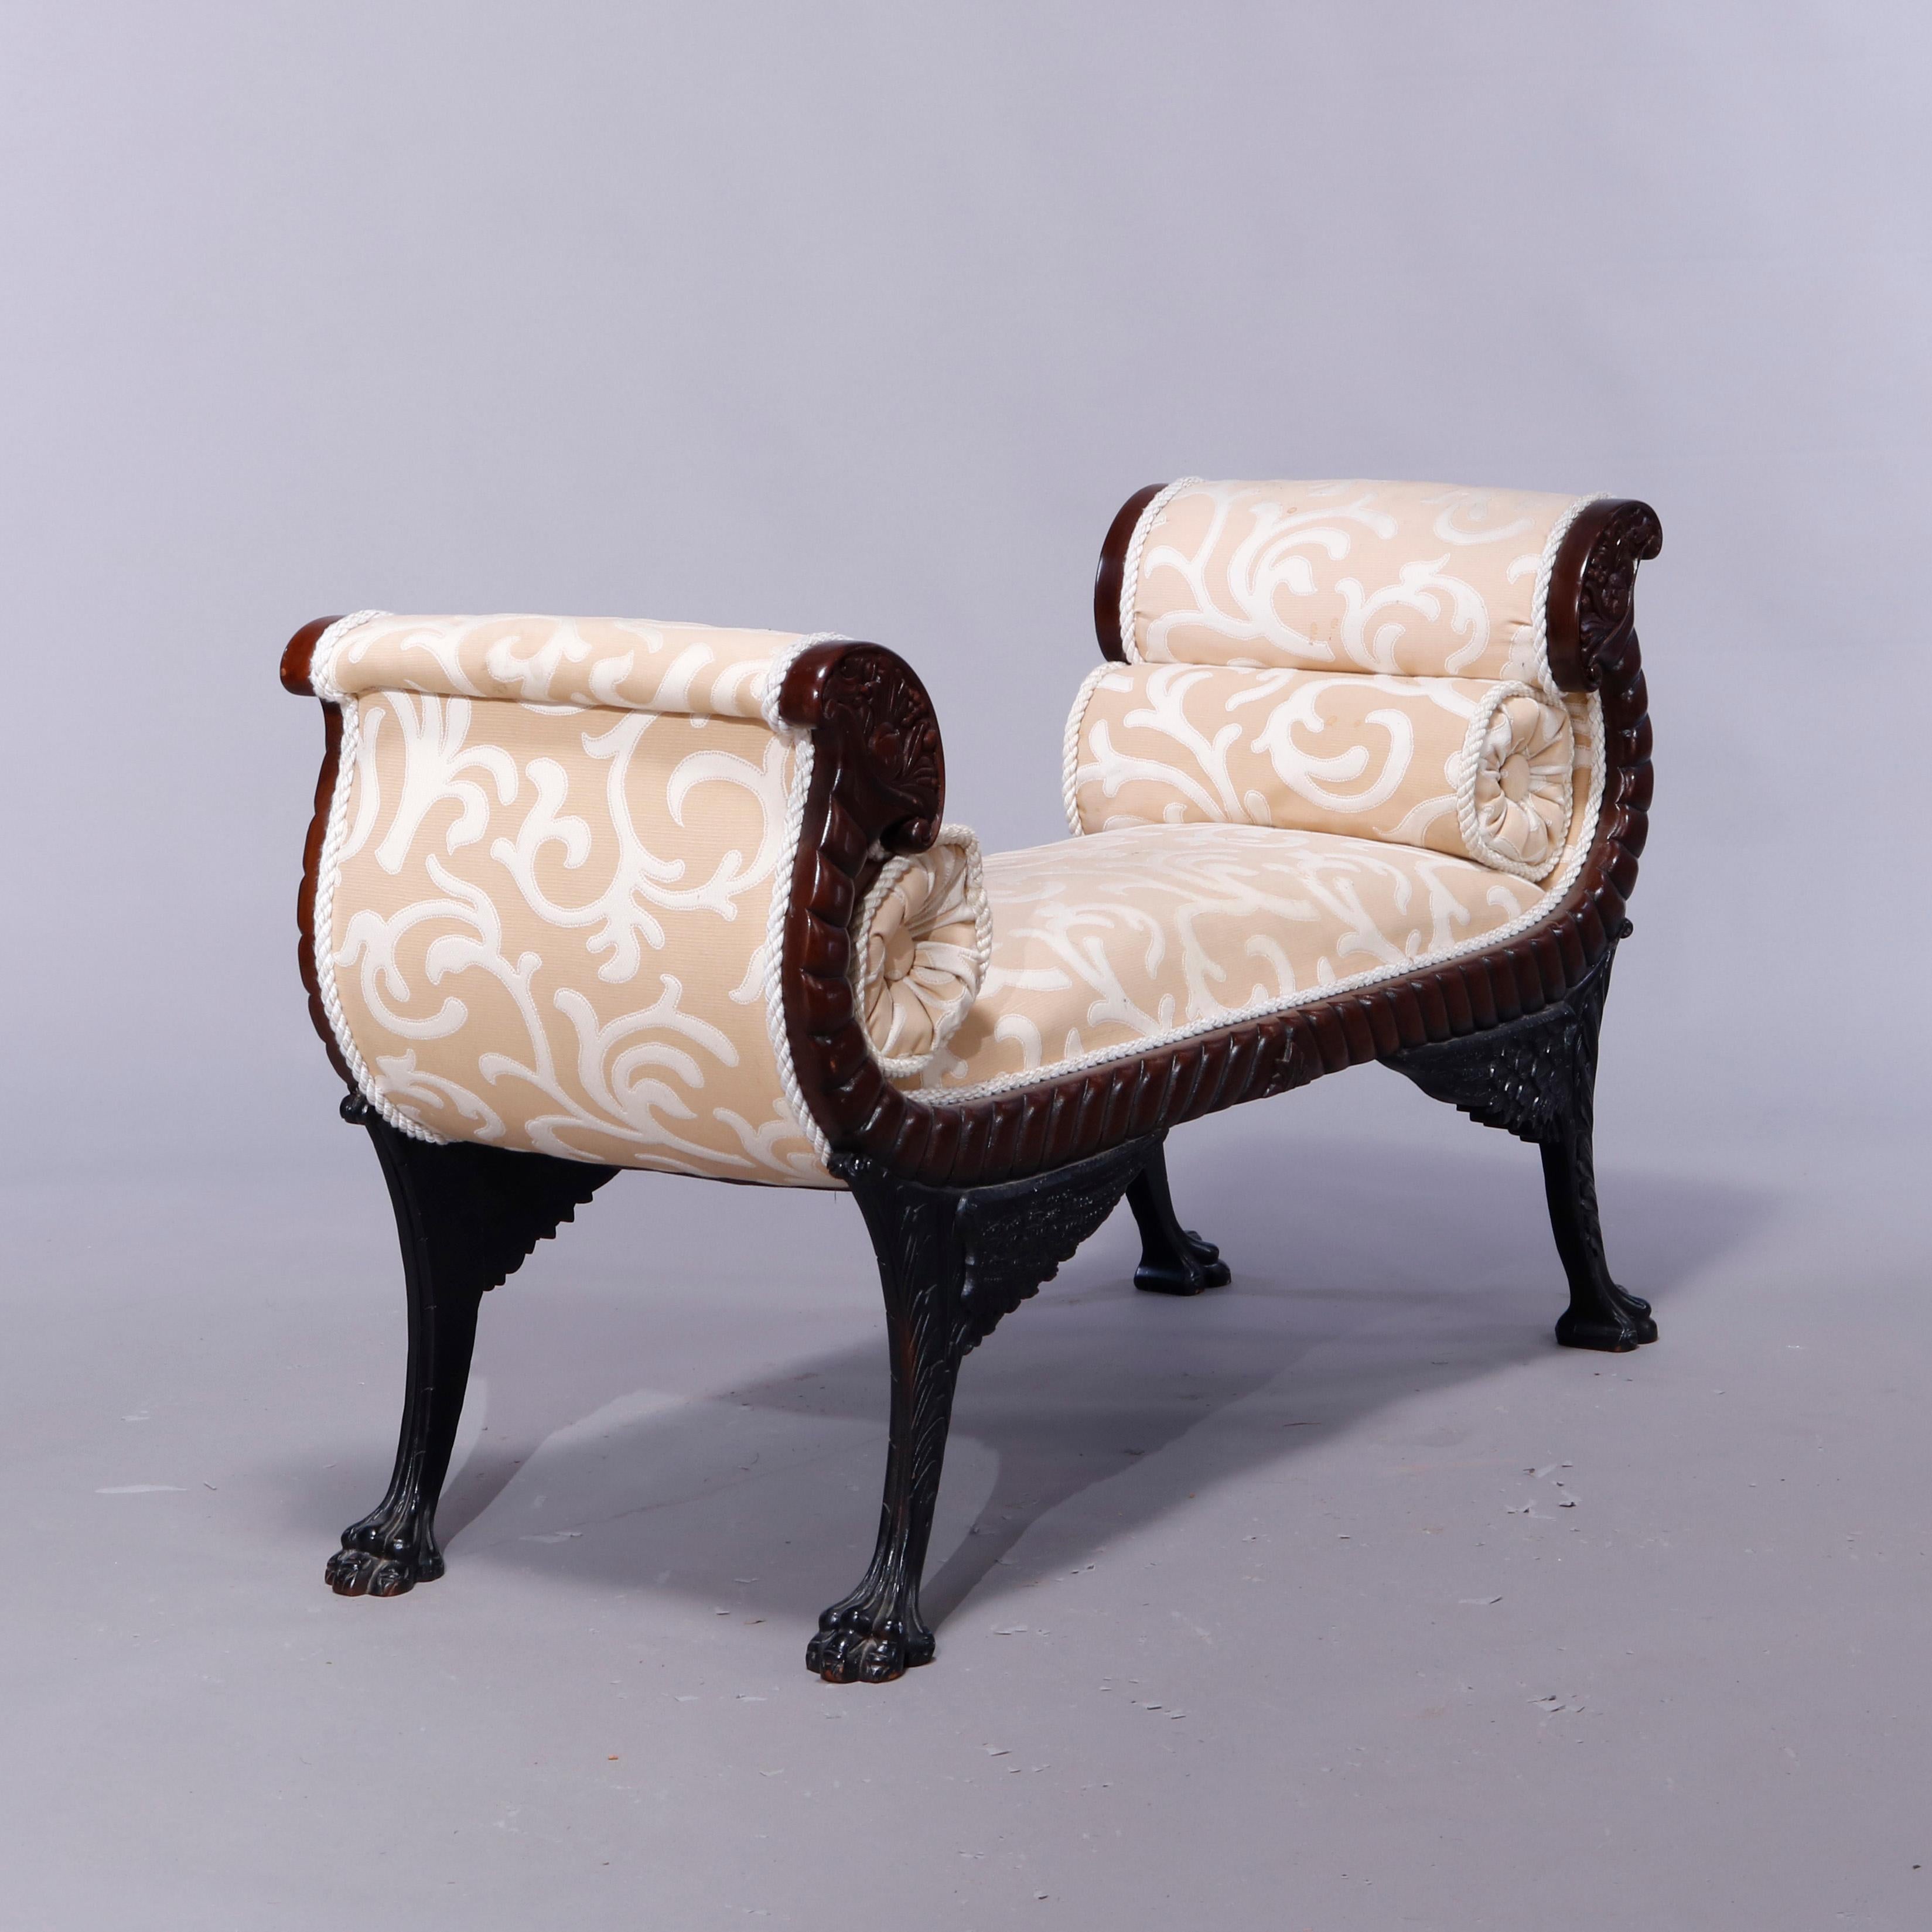 An antique American Empire neoclassical style upholstered window bench offers mahogany frame with carved scroll cornucopia form arms, rope twist frame, and raised on carved winged legs terminating in claw feet, 20th century 

Measures: 27.75